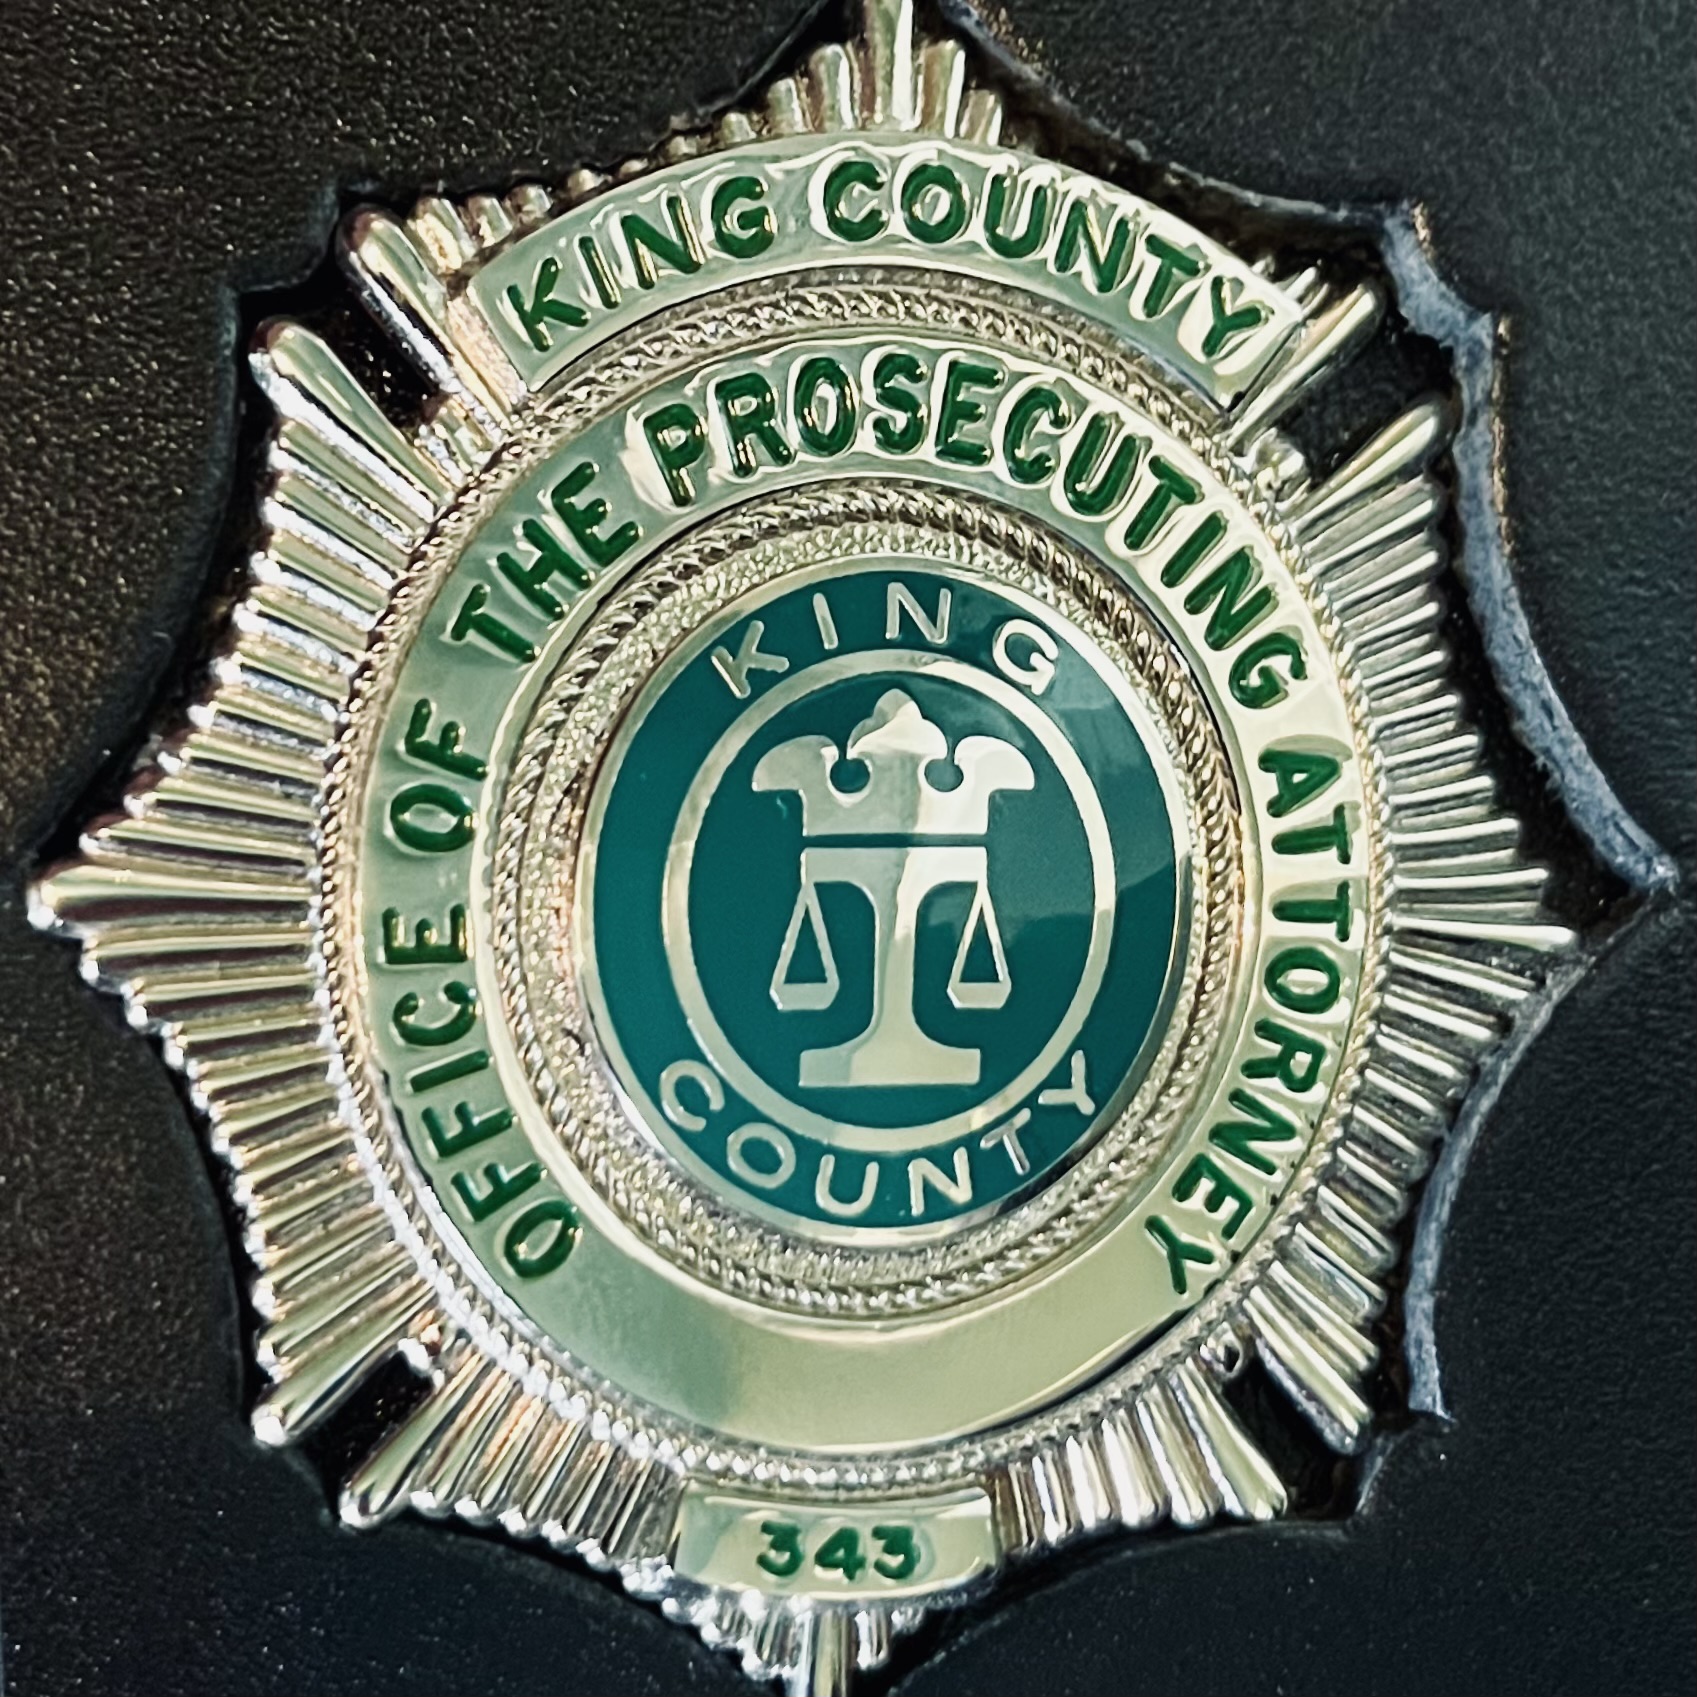 King County Prosecuting Attorney's badge